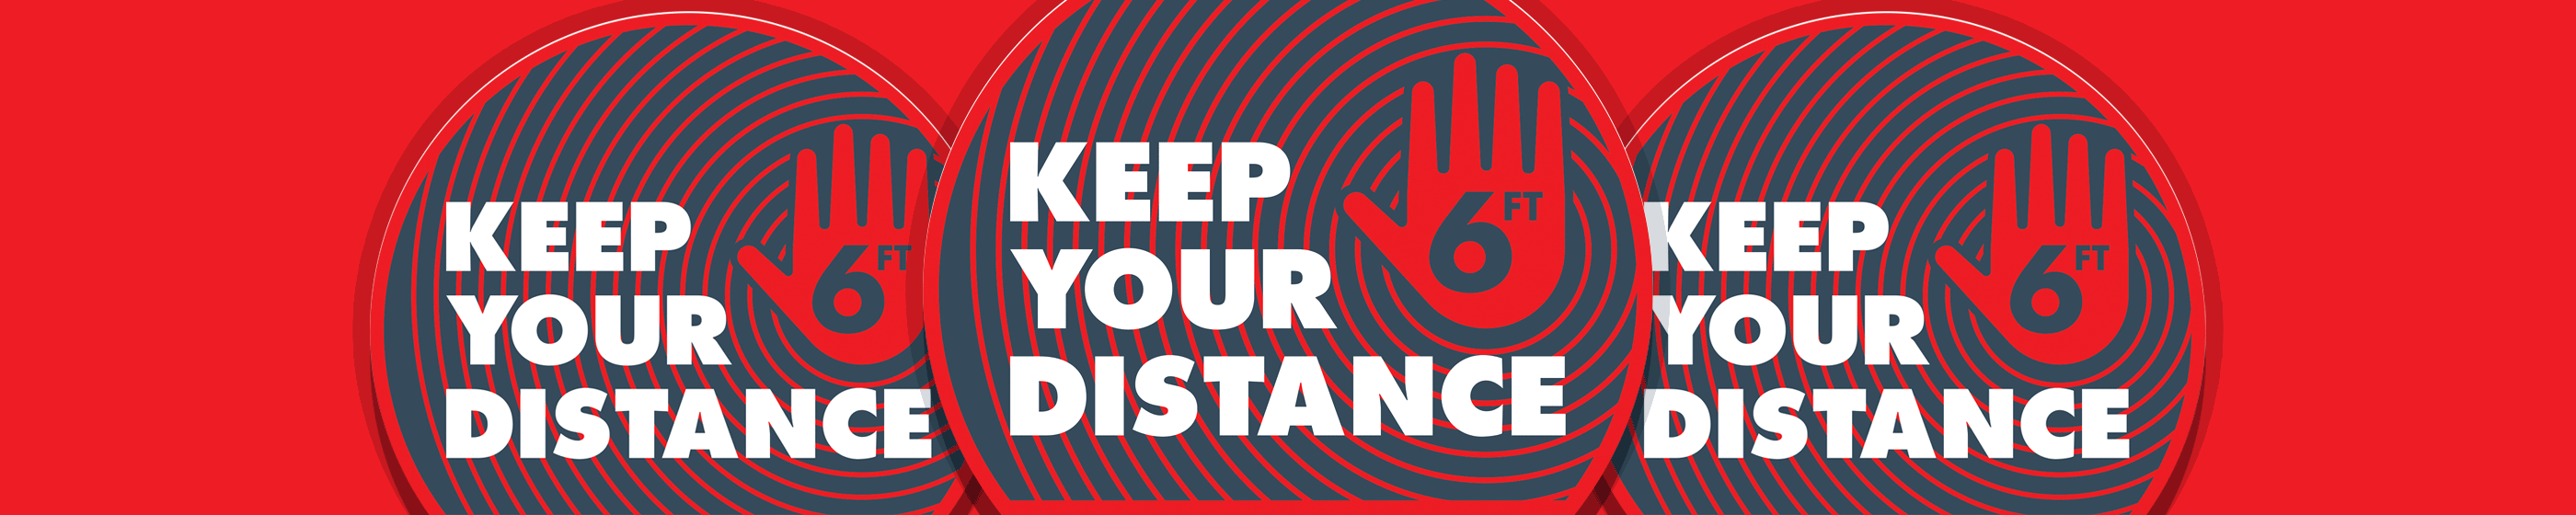 Keep Your Distance Button Cover Image